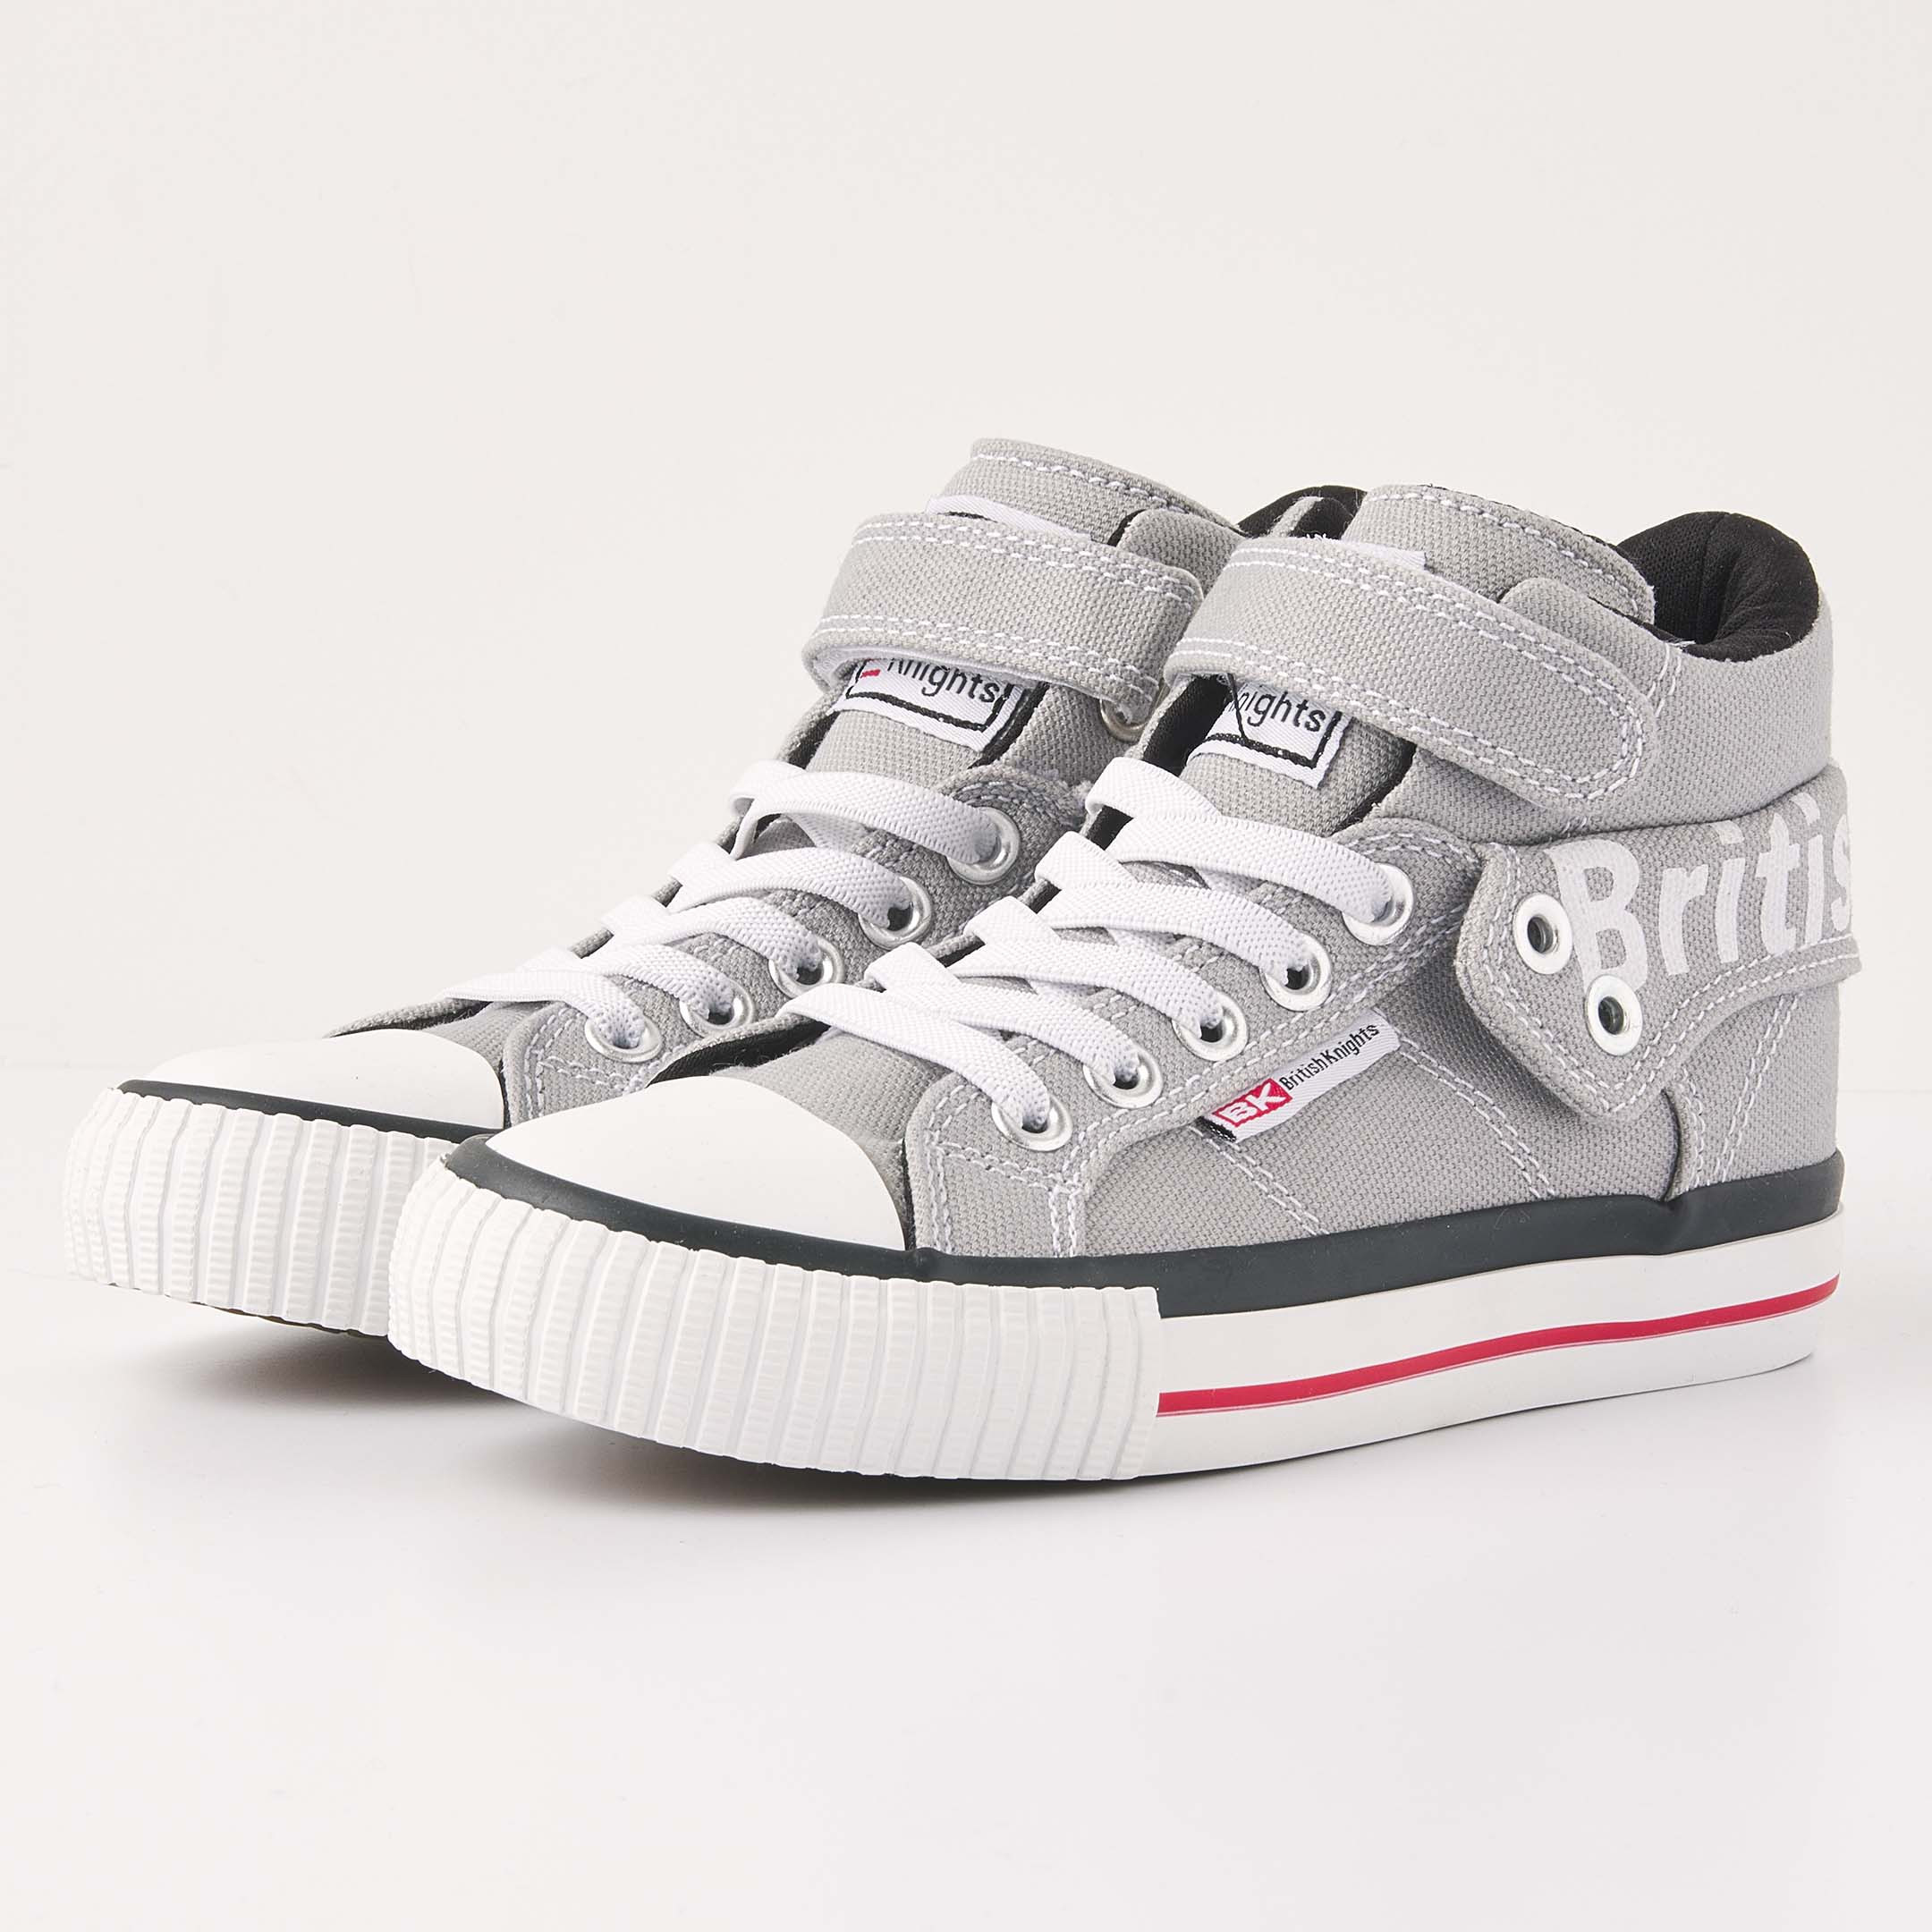 British Knights Sneaker Front view  B51-3742C-04 ROCO HIGH-TOP MALE